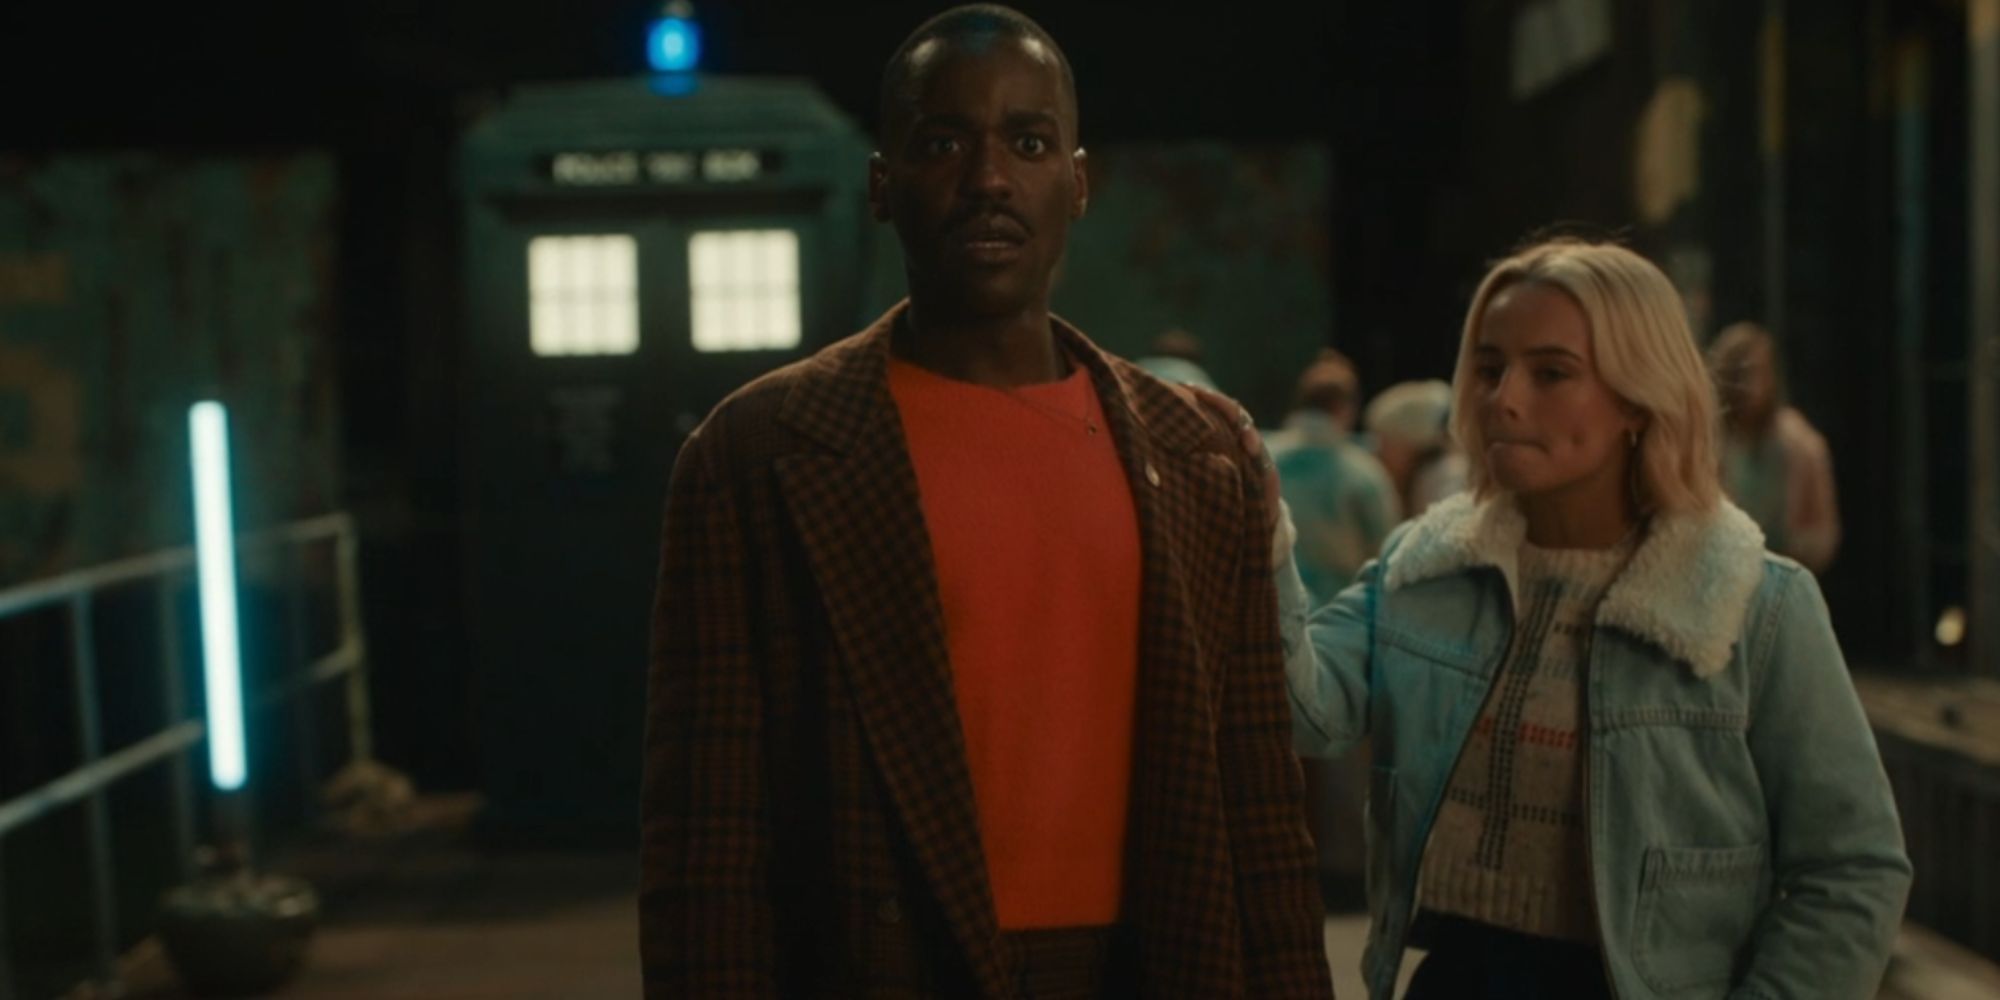 Ncuti Gatwa's Fifteenth Doctor looking stunned in Doctor Who with Millie Gibson's Ruby Sunday resting a supportive hand on his shoulder